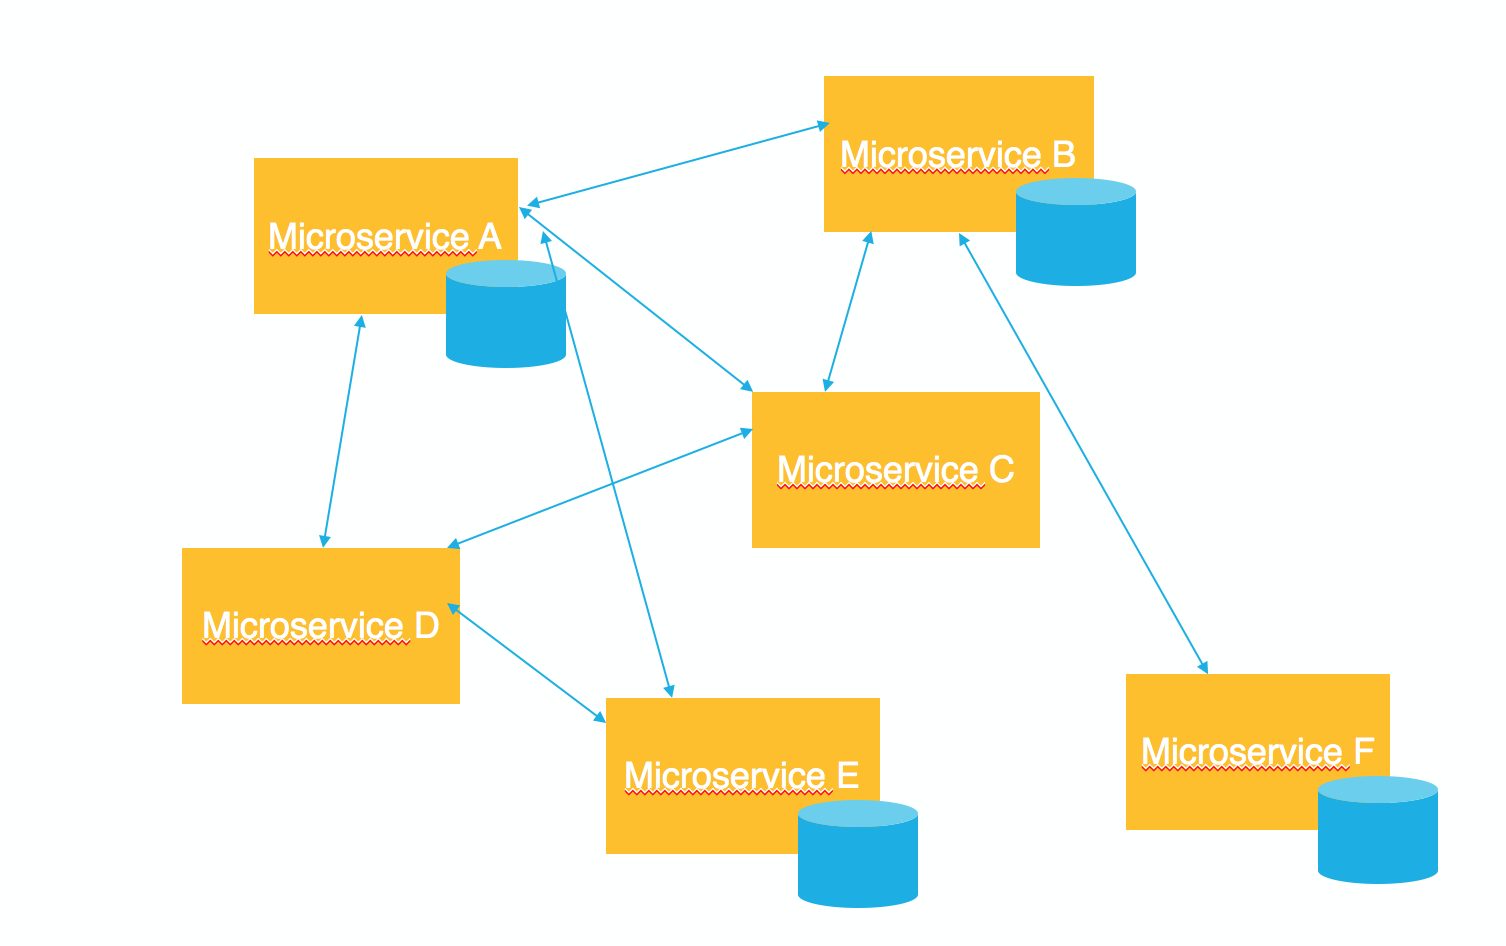 An example of what a microservices architecture looks like